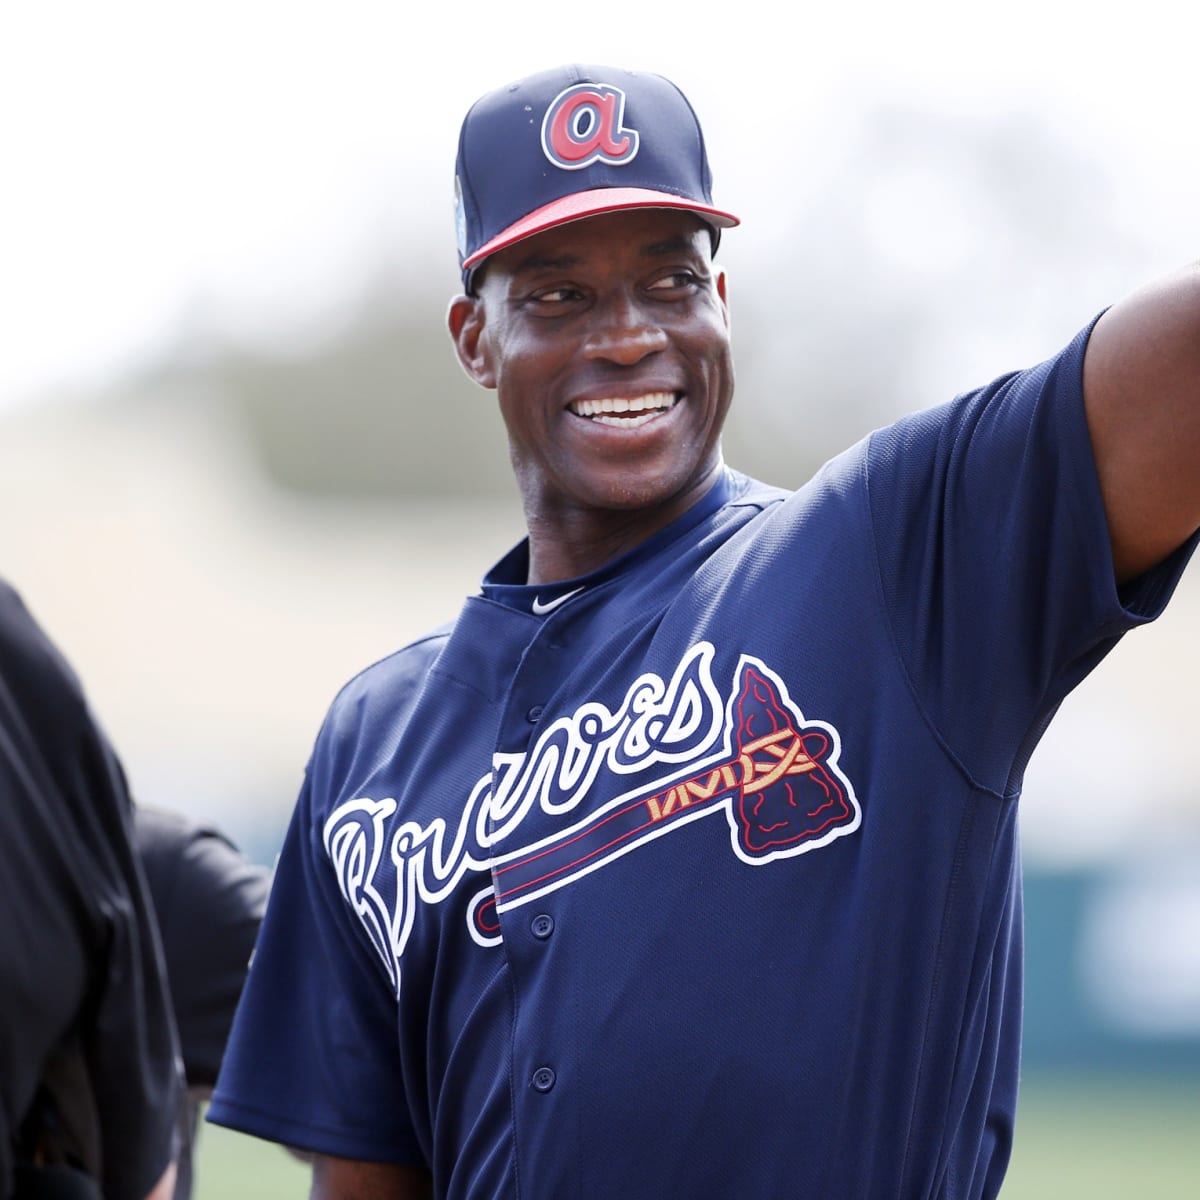 Dale Murphy, Fred McGriff to find out Hall of Fame decision Sunday